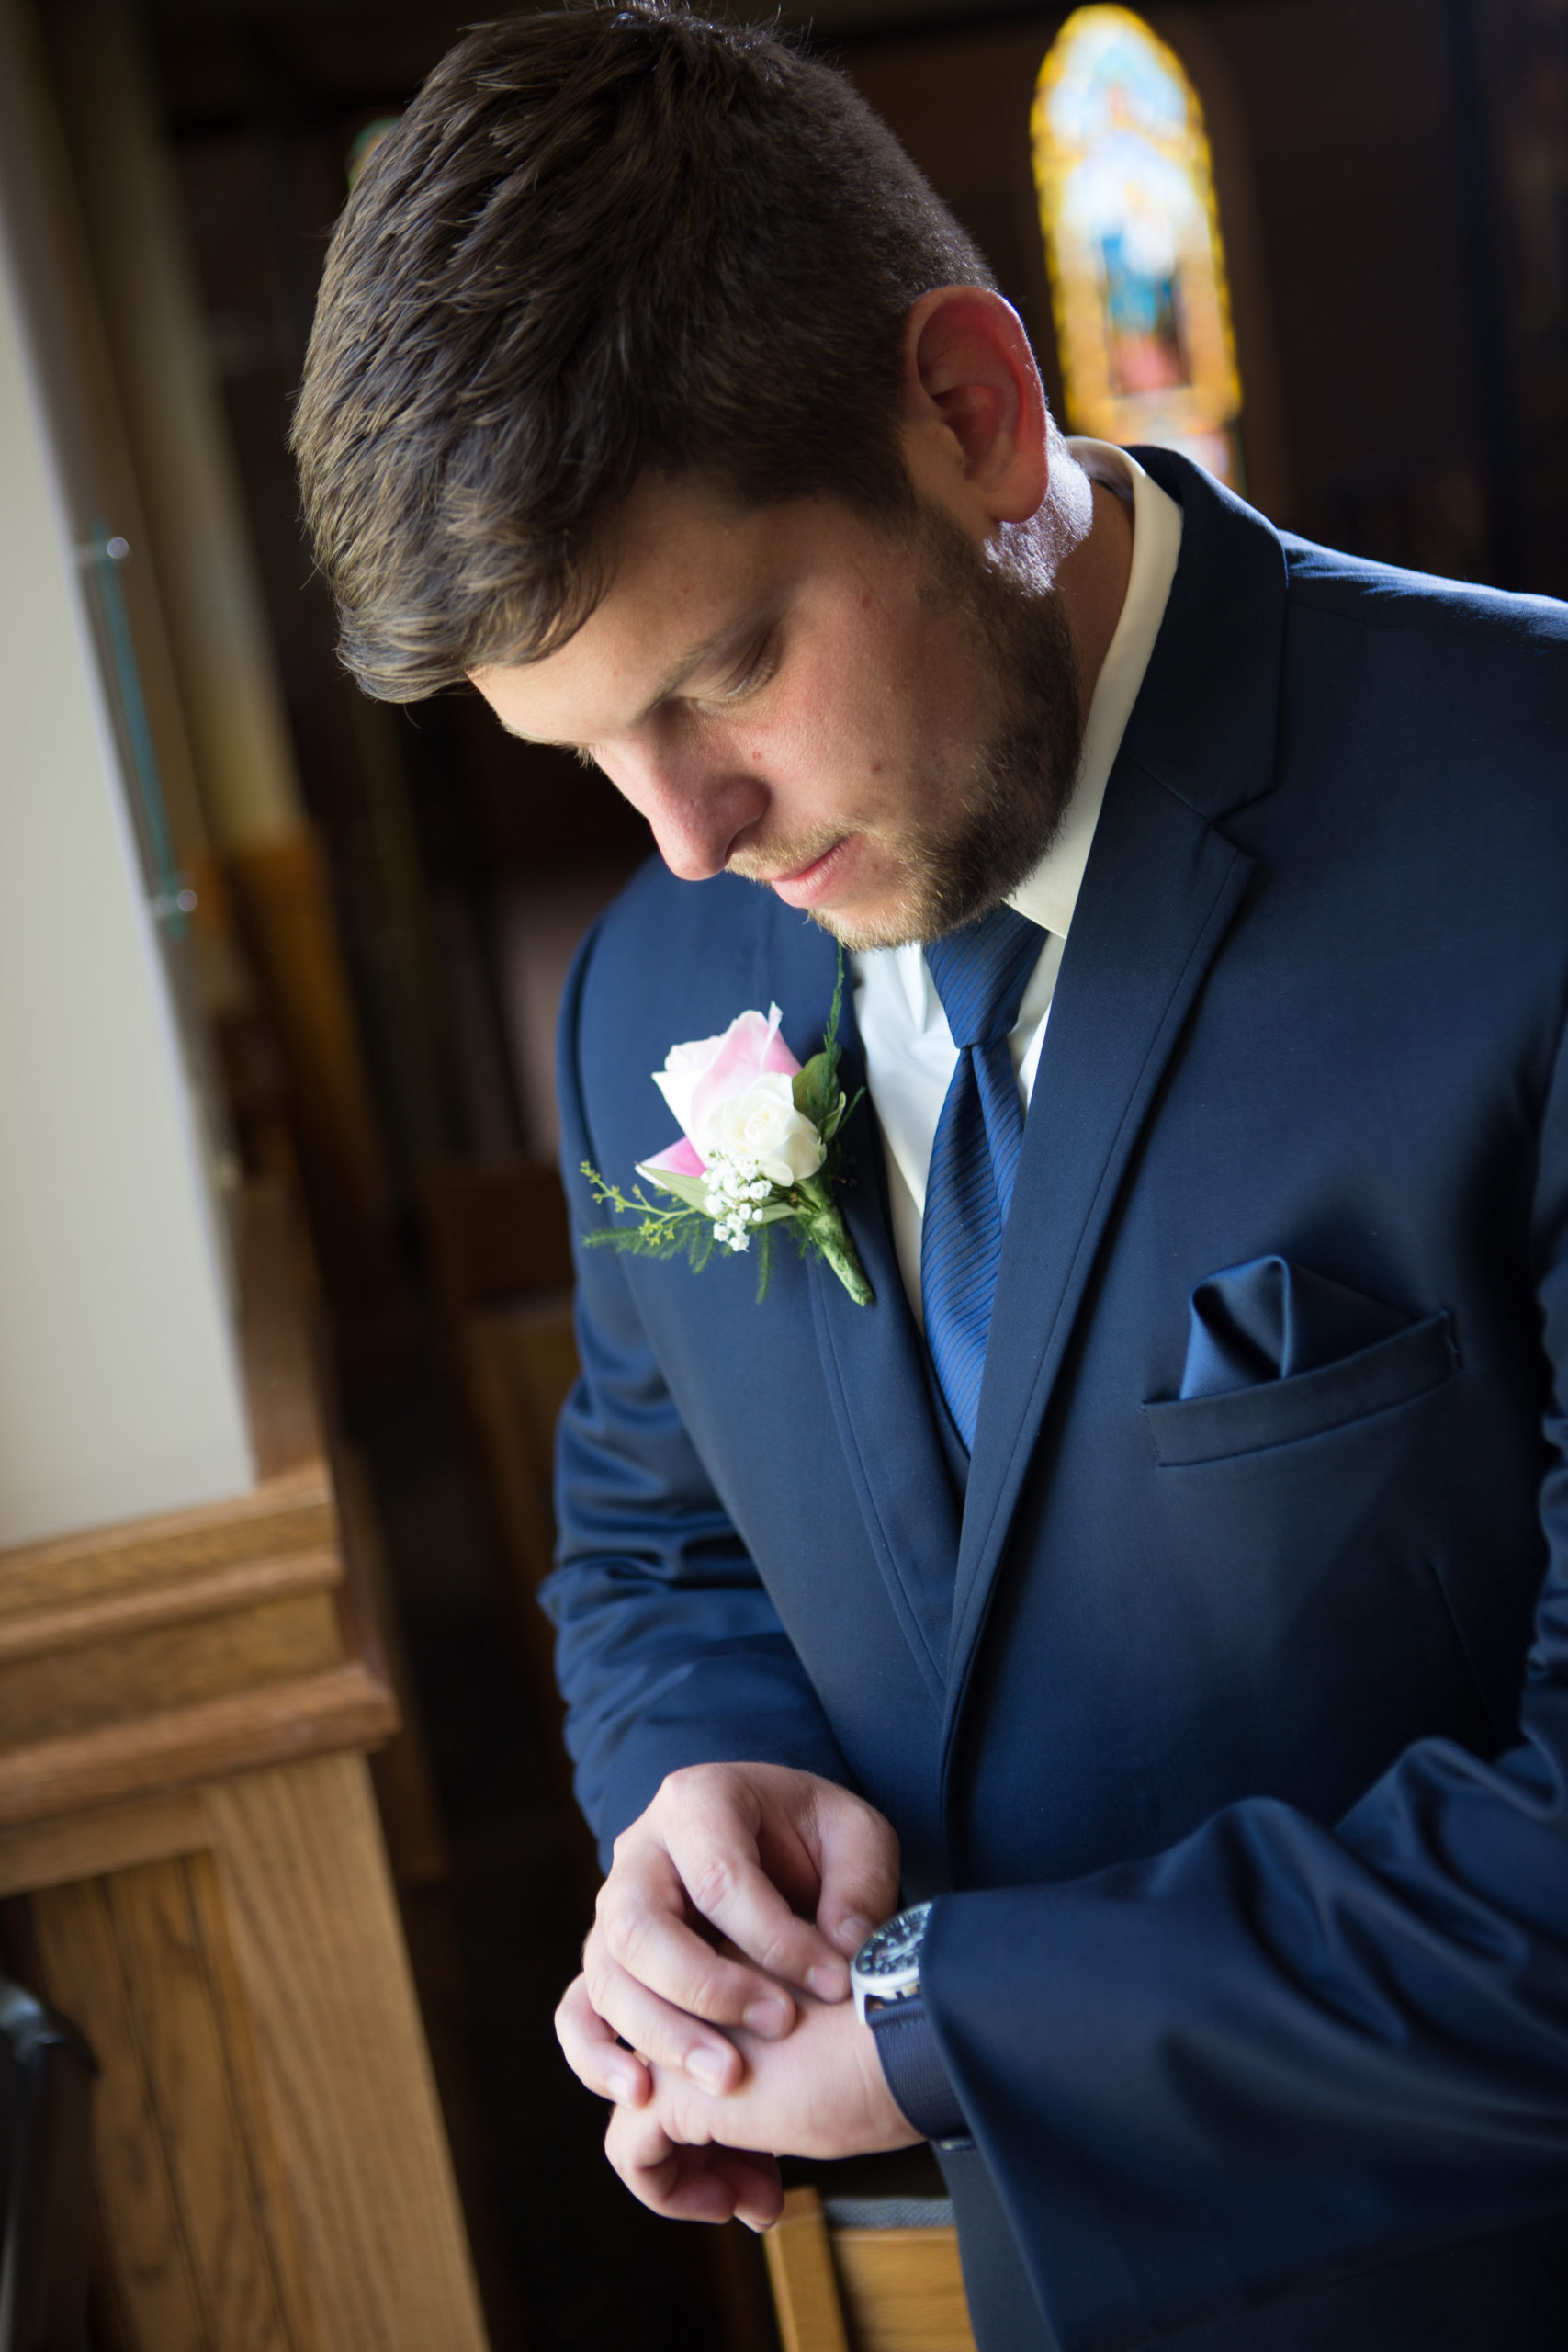 Posing Tips For The GROOM